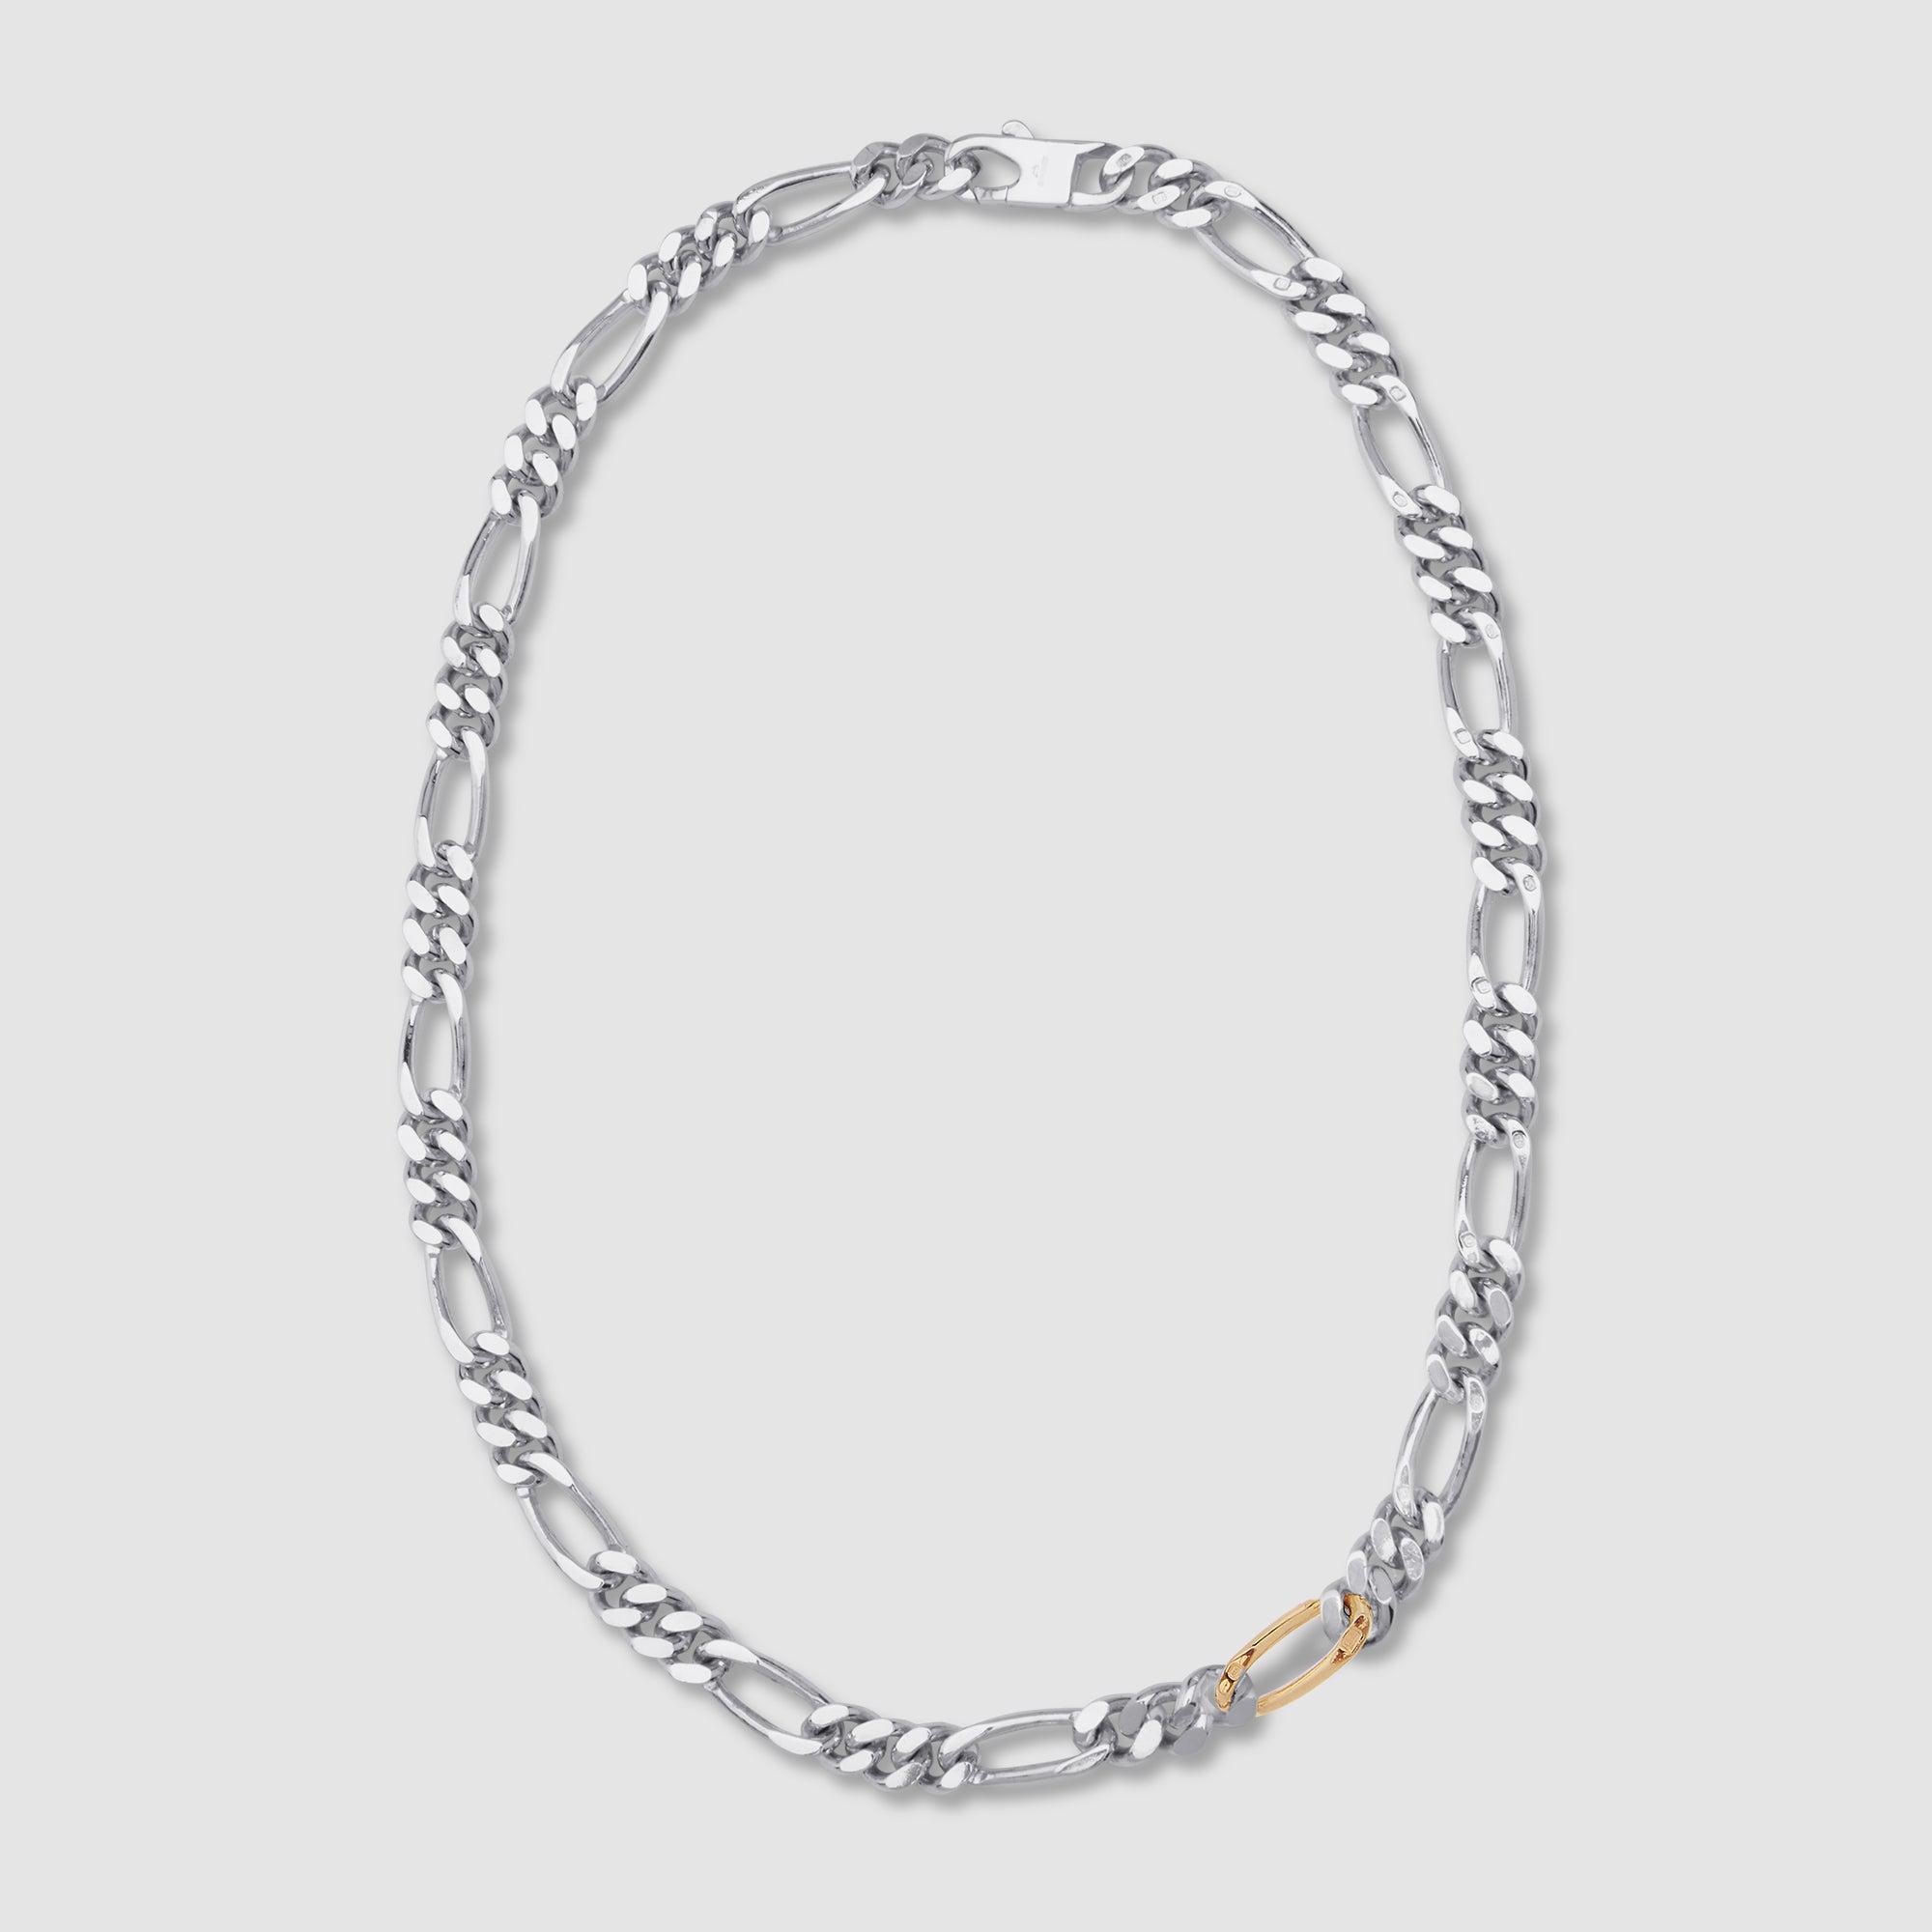 Bunney Silver Figaro Necklace with Gold Link by ANDREW BUNNEY